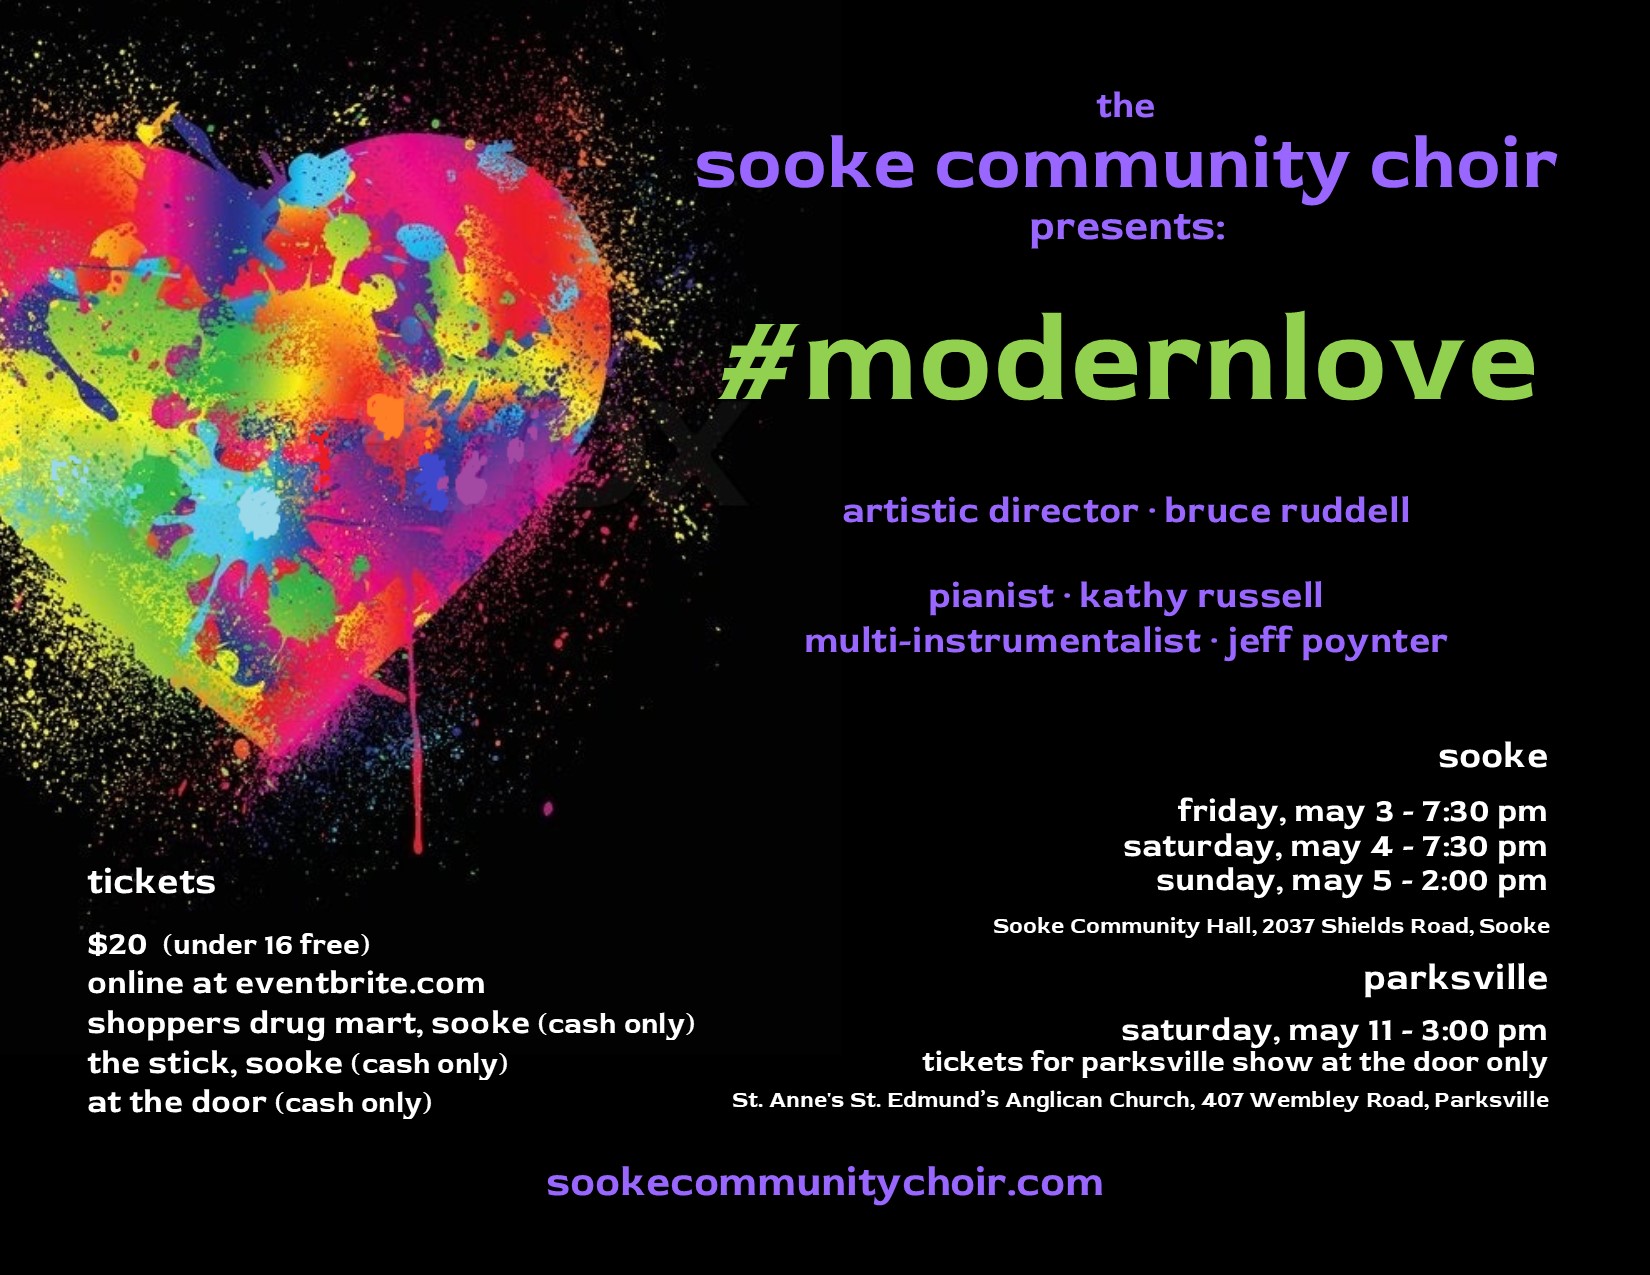 #modernlove with The Sooke Community Choir